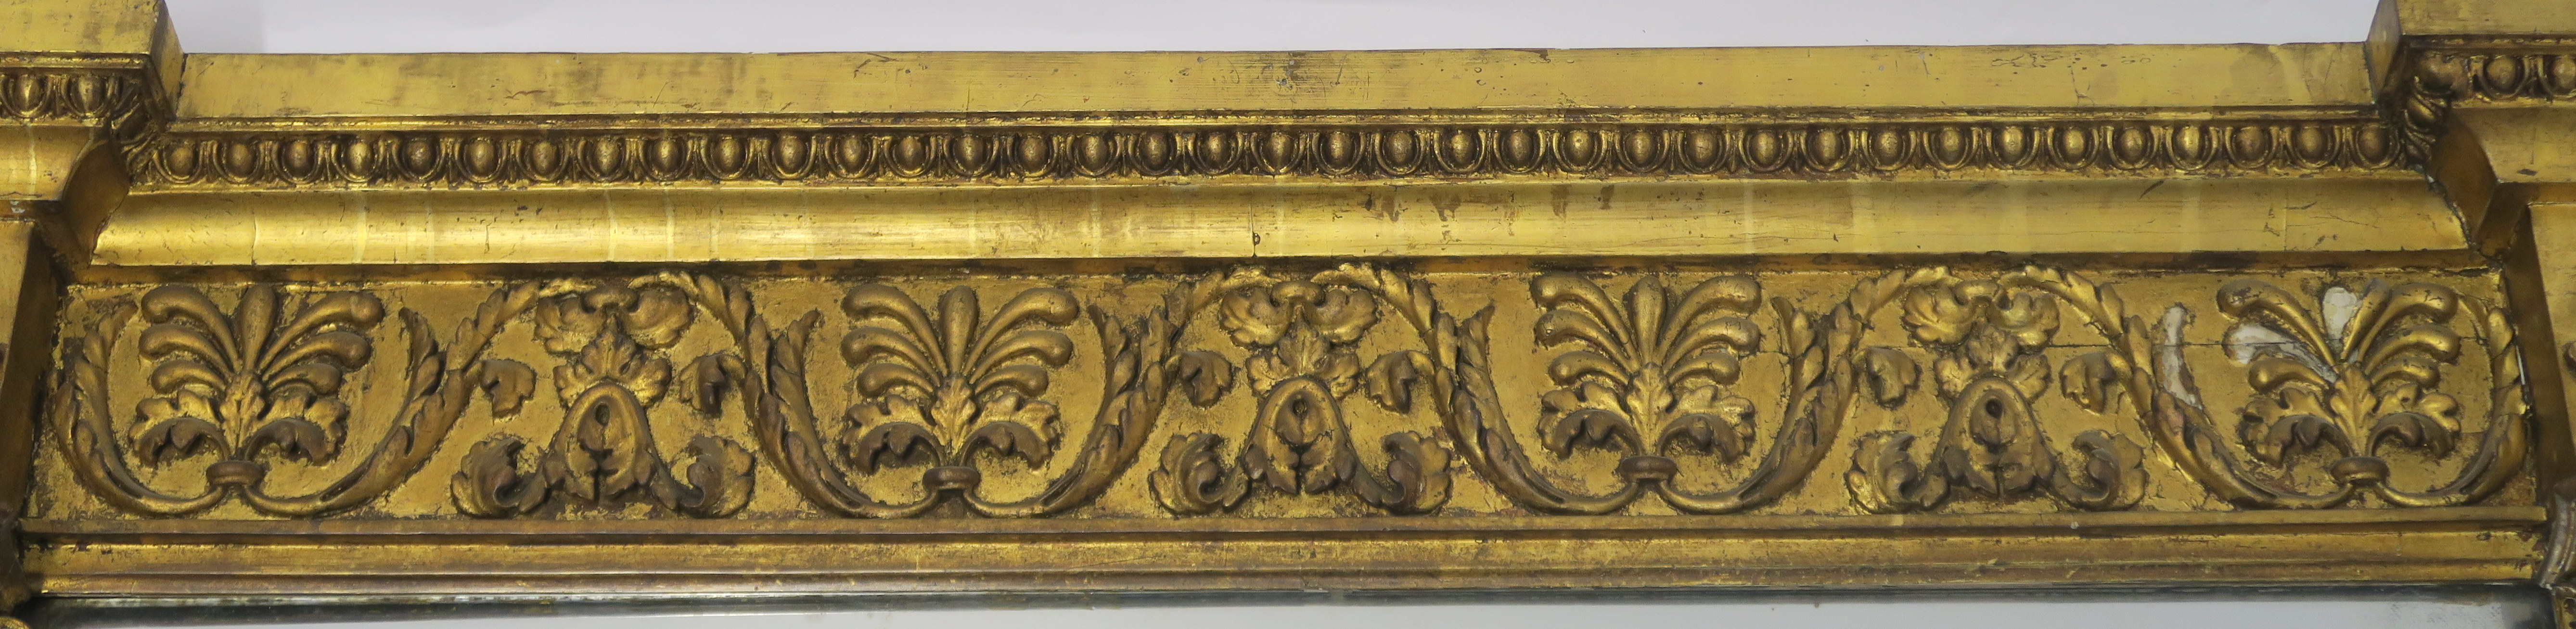 A REGENCY GILTWOOD OVERMANTLE MIRROR the cornice set with egg and dart moulding, above acanthus leaf - Image 4 of 9